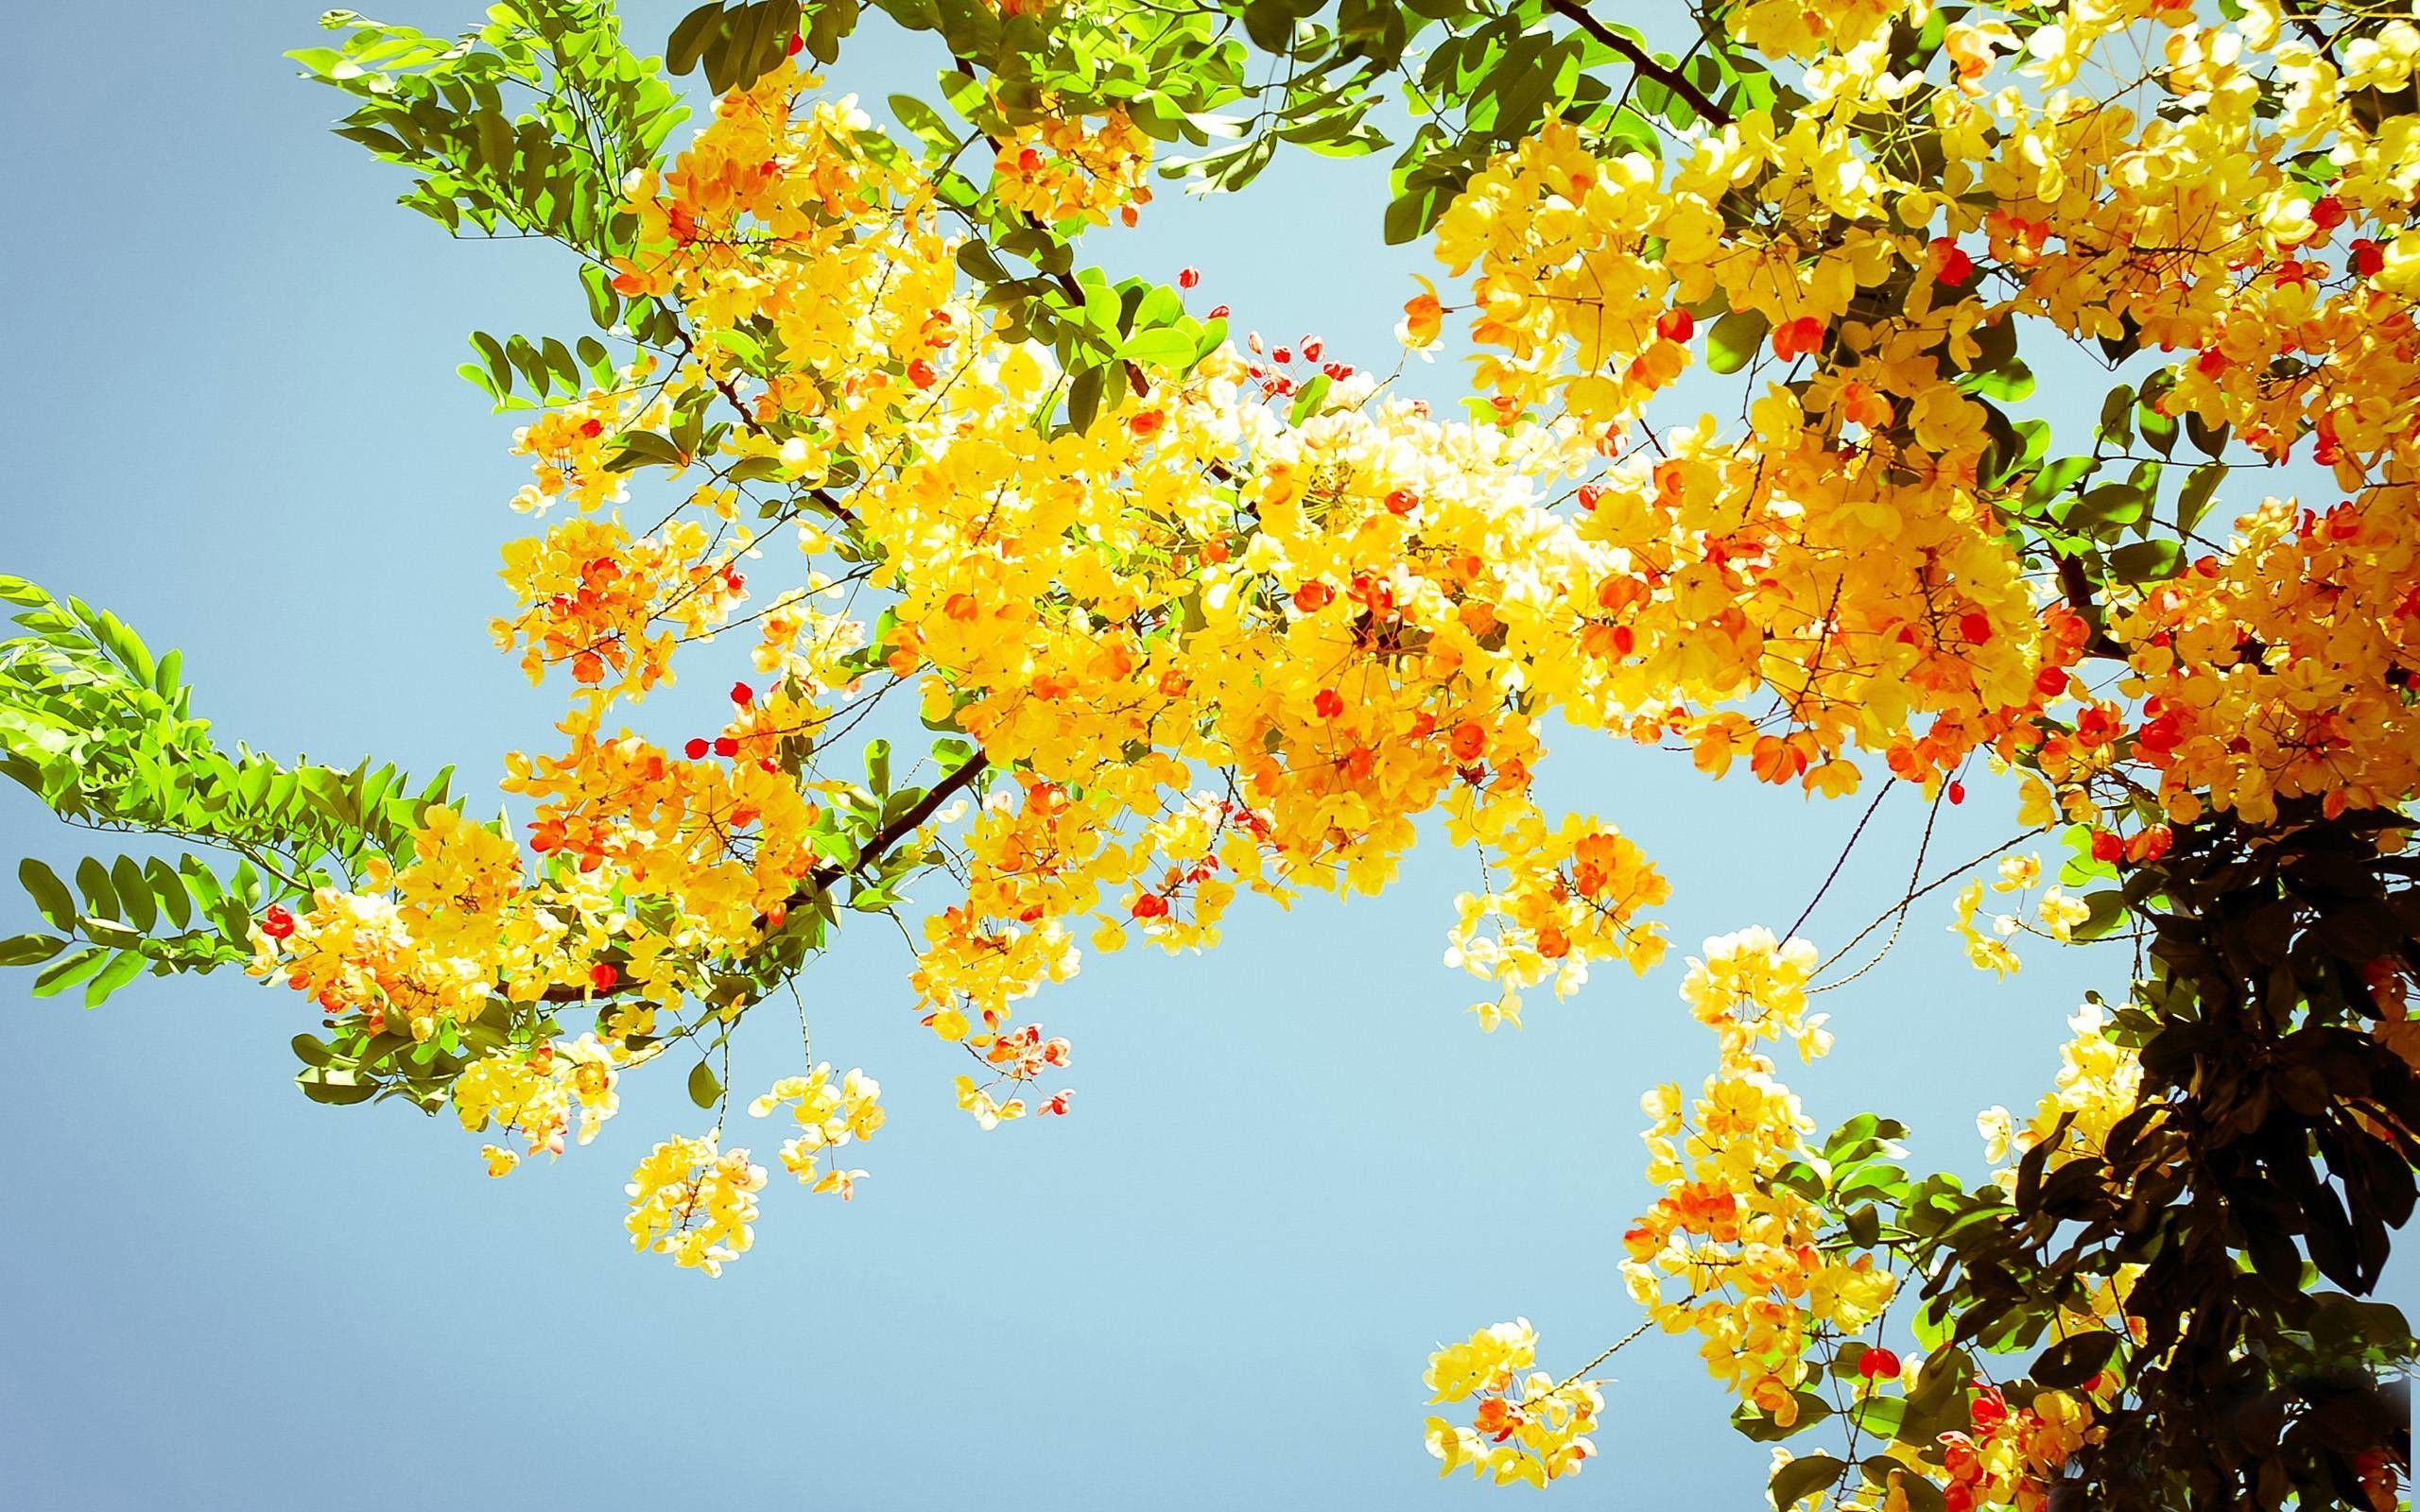 A tree with yellow flowers and green leaves. - Summer